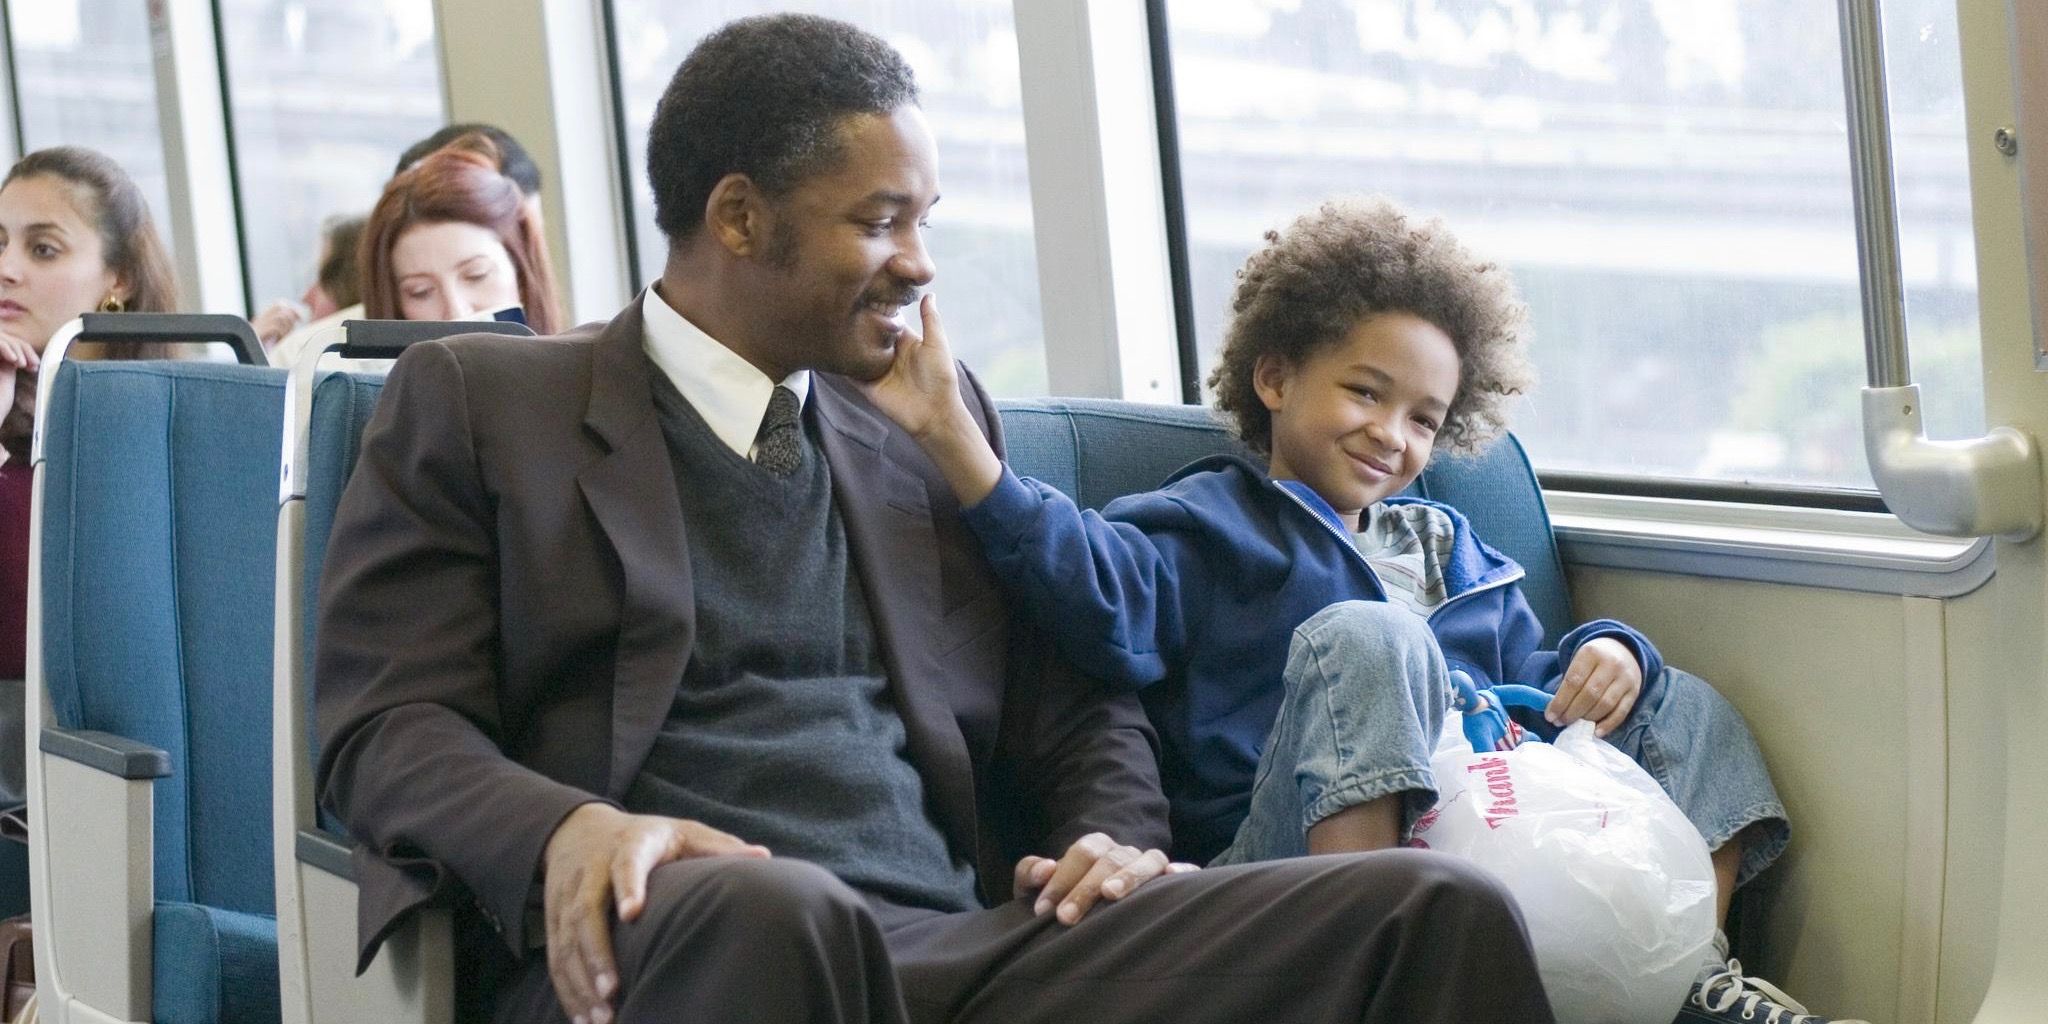 Will Smith and Jaden Smith riding a bus in The Pursuit of Happyness